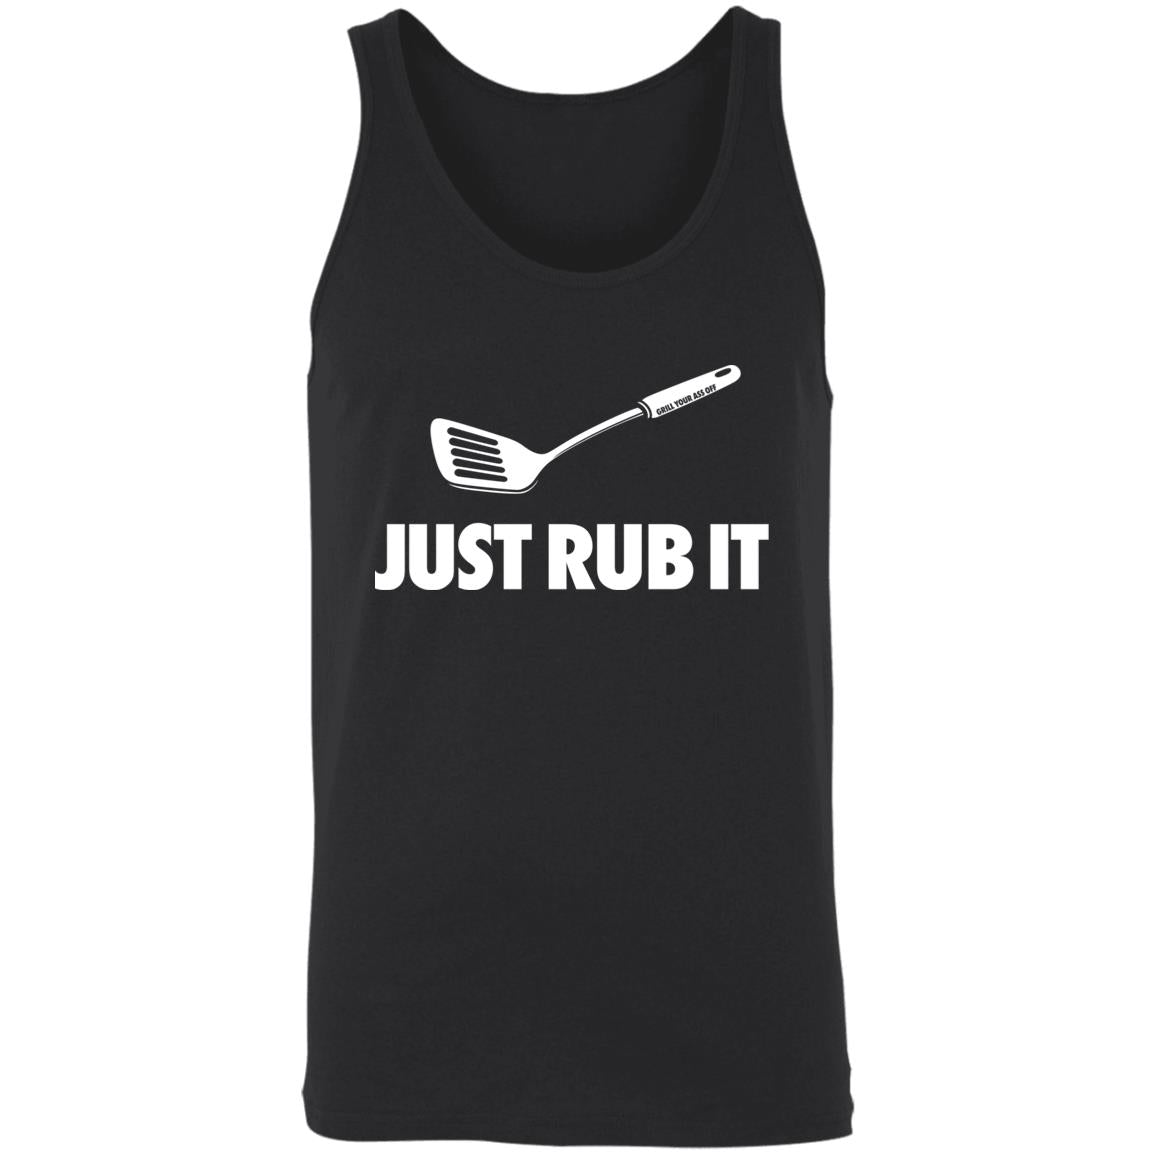 Just Rub It - Grill Your Ass Off